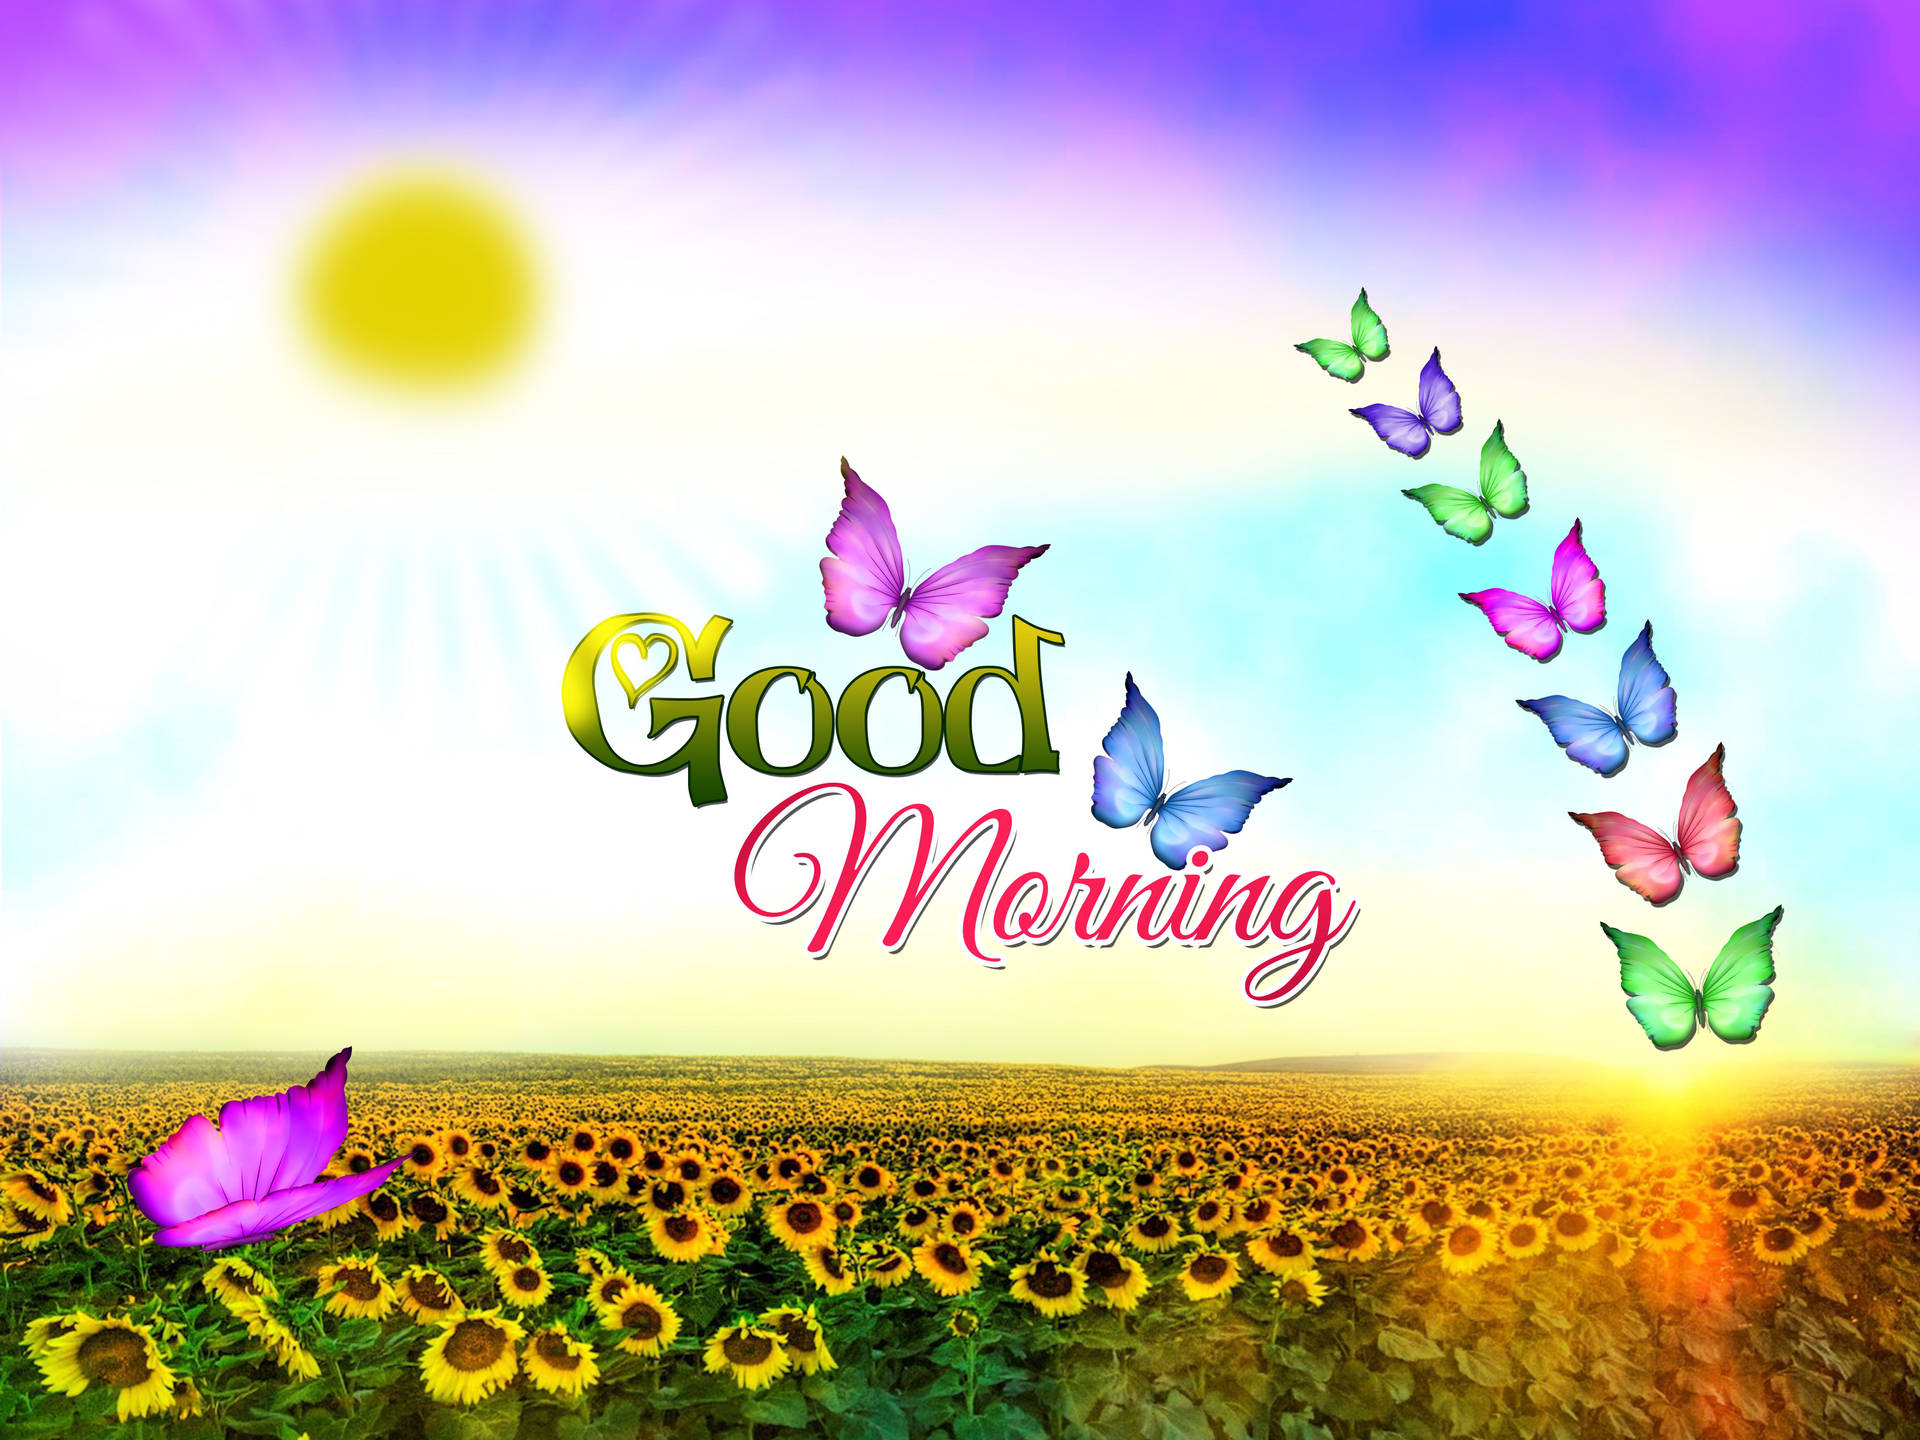 Widescreen Image About Good Morning On Nature Wallpaper High Resolution For Background